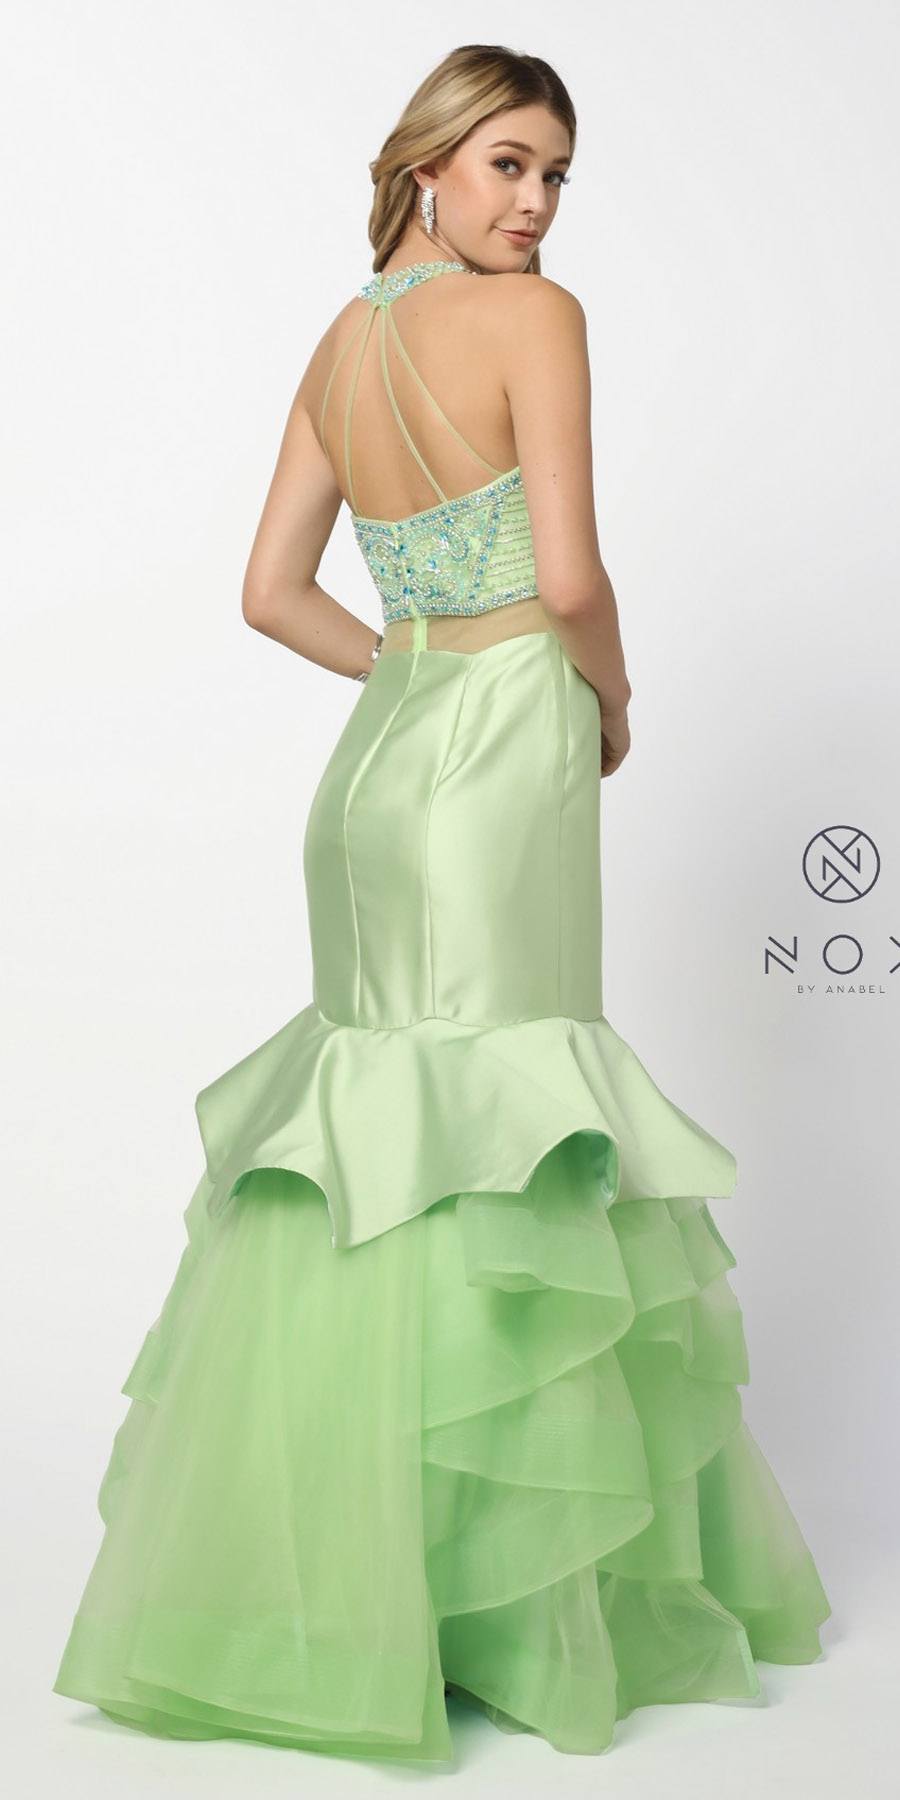 Nox Anabel 8332 Pistachio-Green Mock Two-Piece Embellished Tiered Mermaid Prom Gown